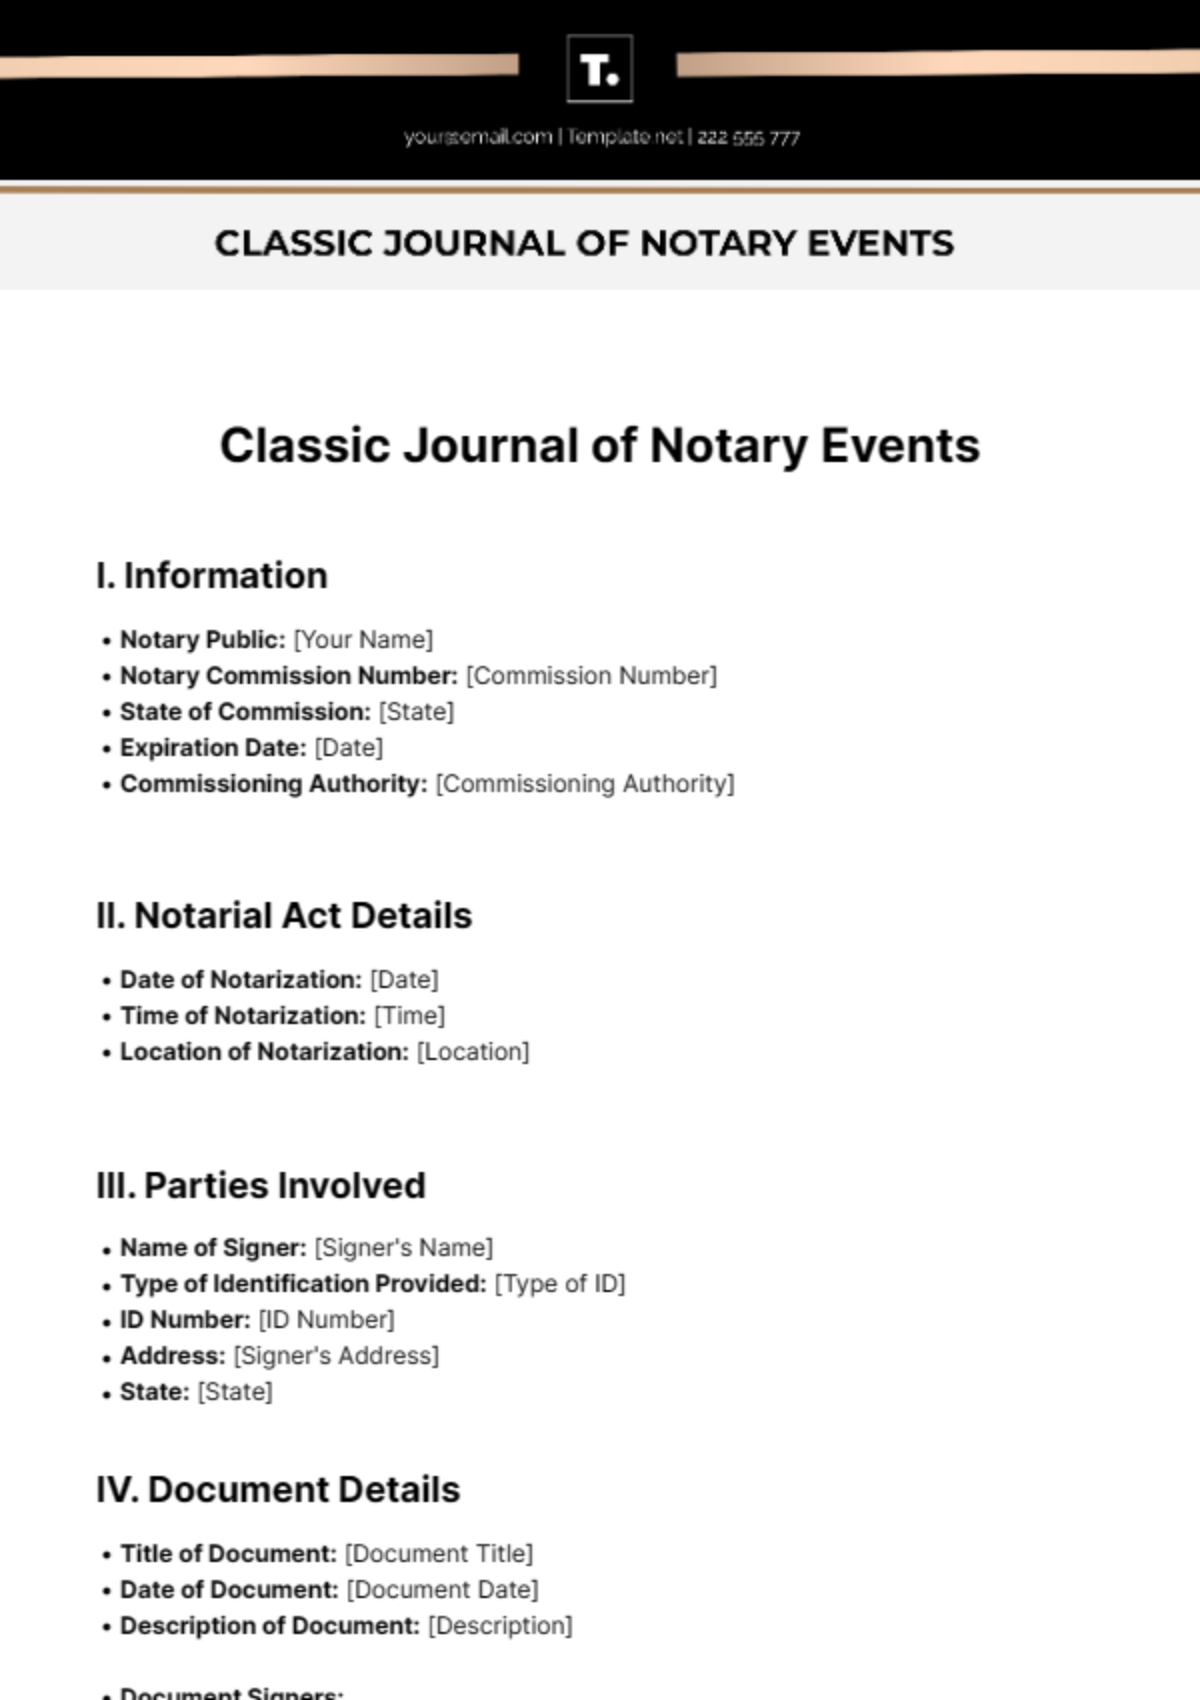 Free Classic Journal of Notary Events Template